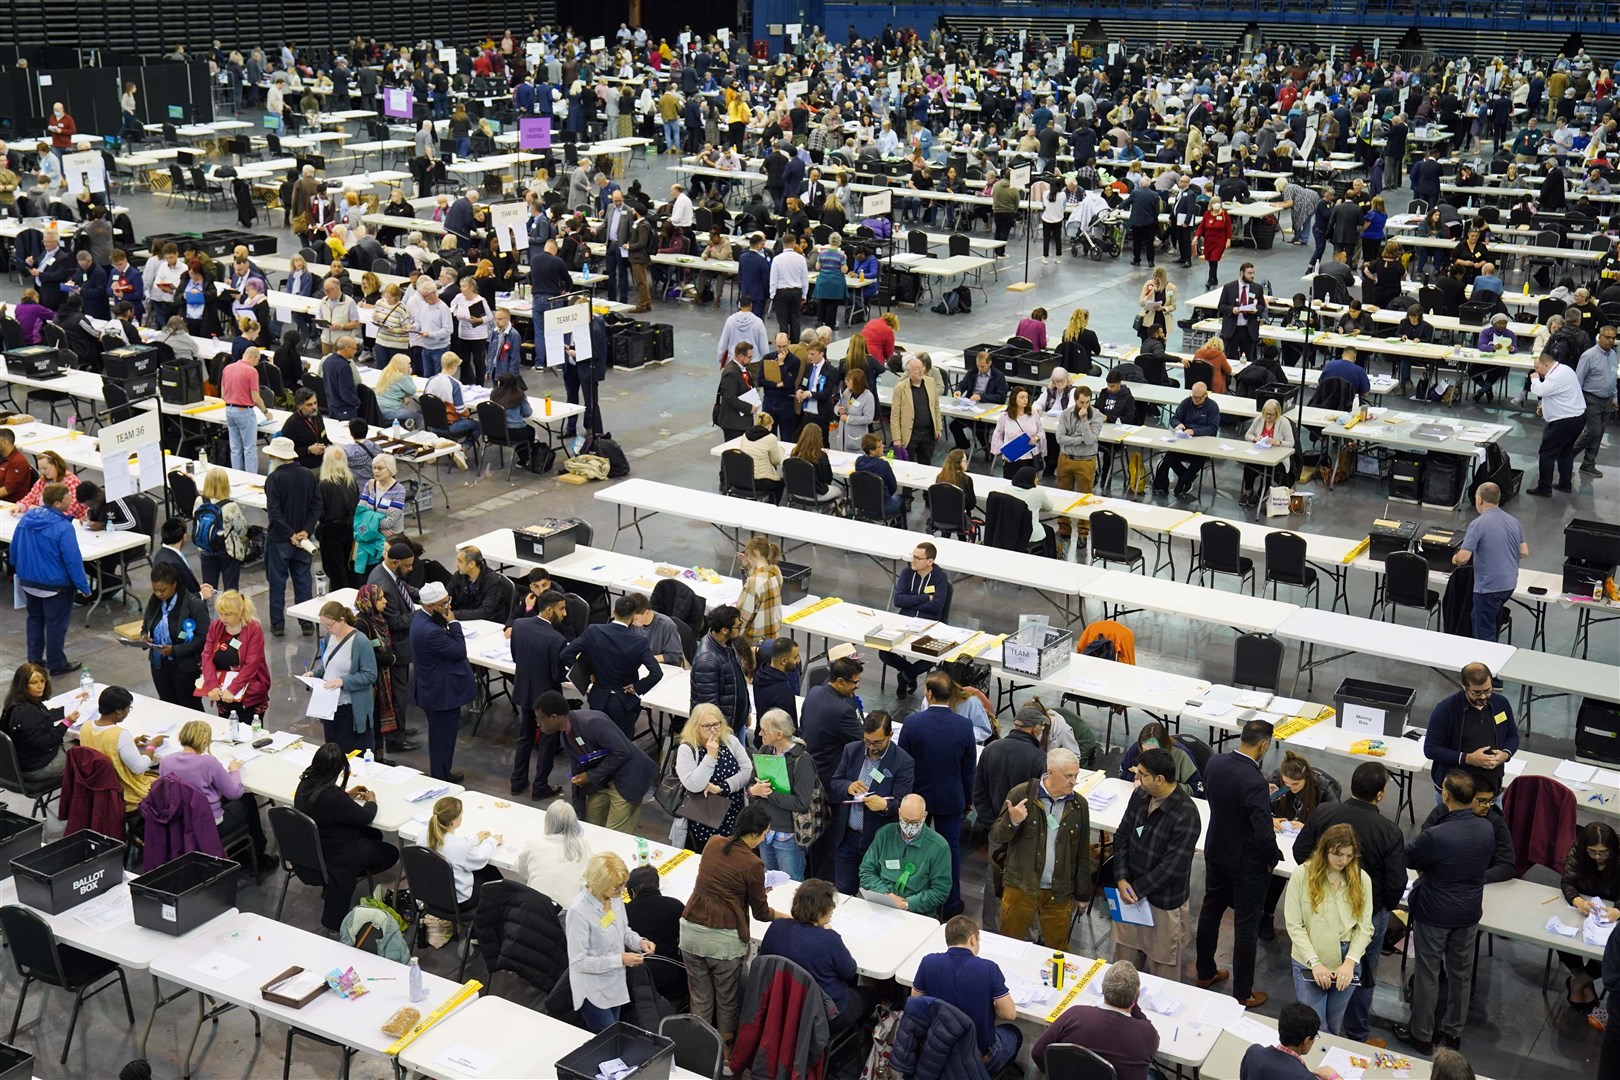 Ballot papers are sorted at Utilita Arena in Birmingham (Jacob King/PA)